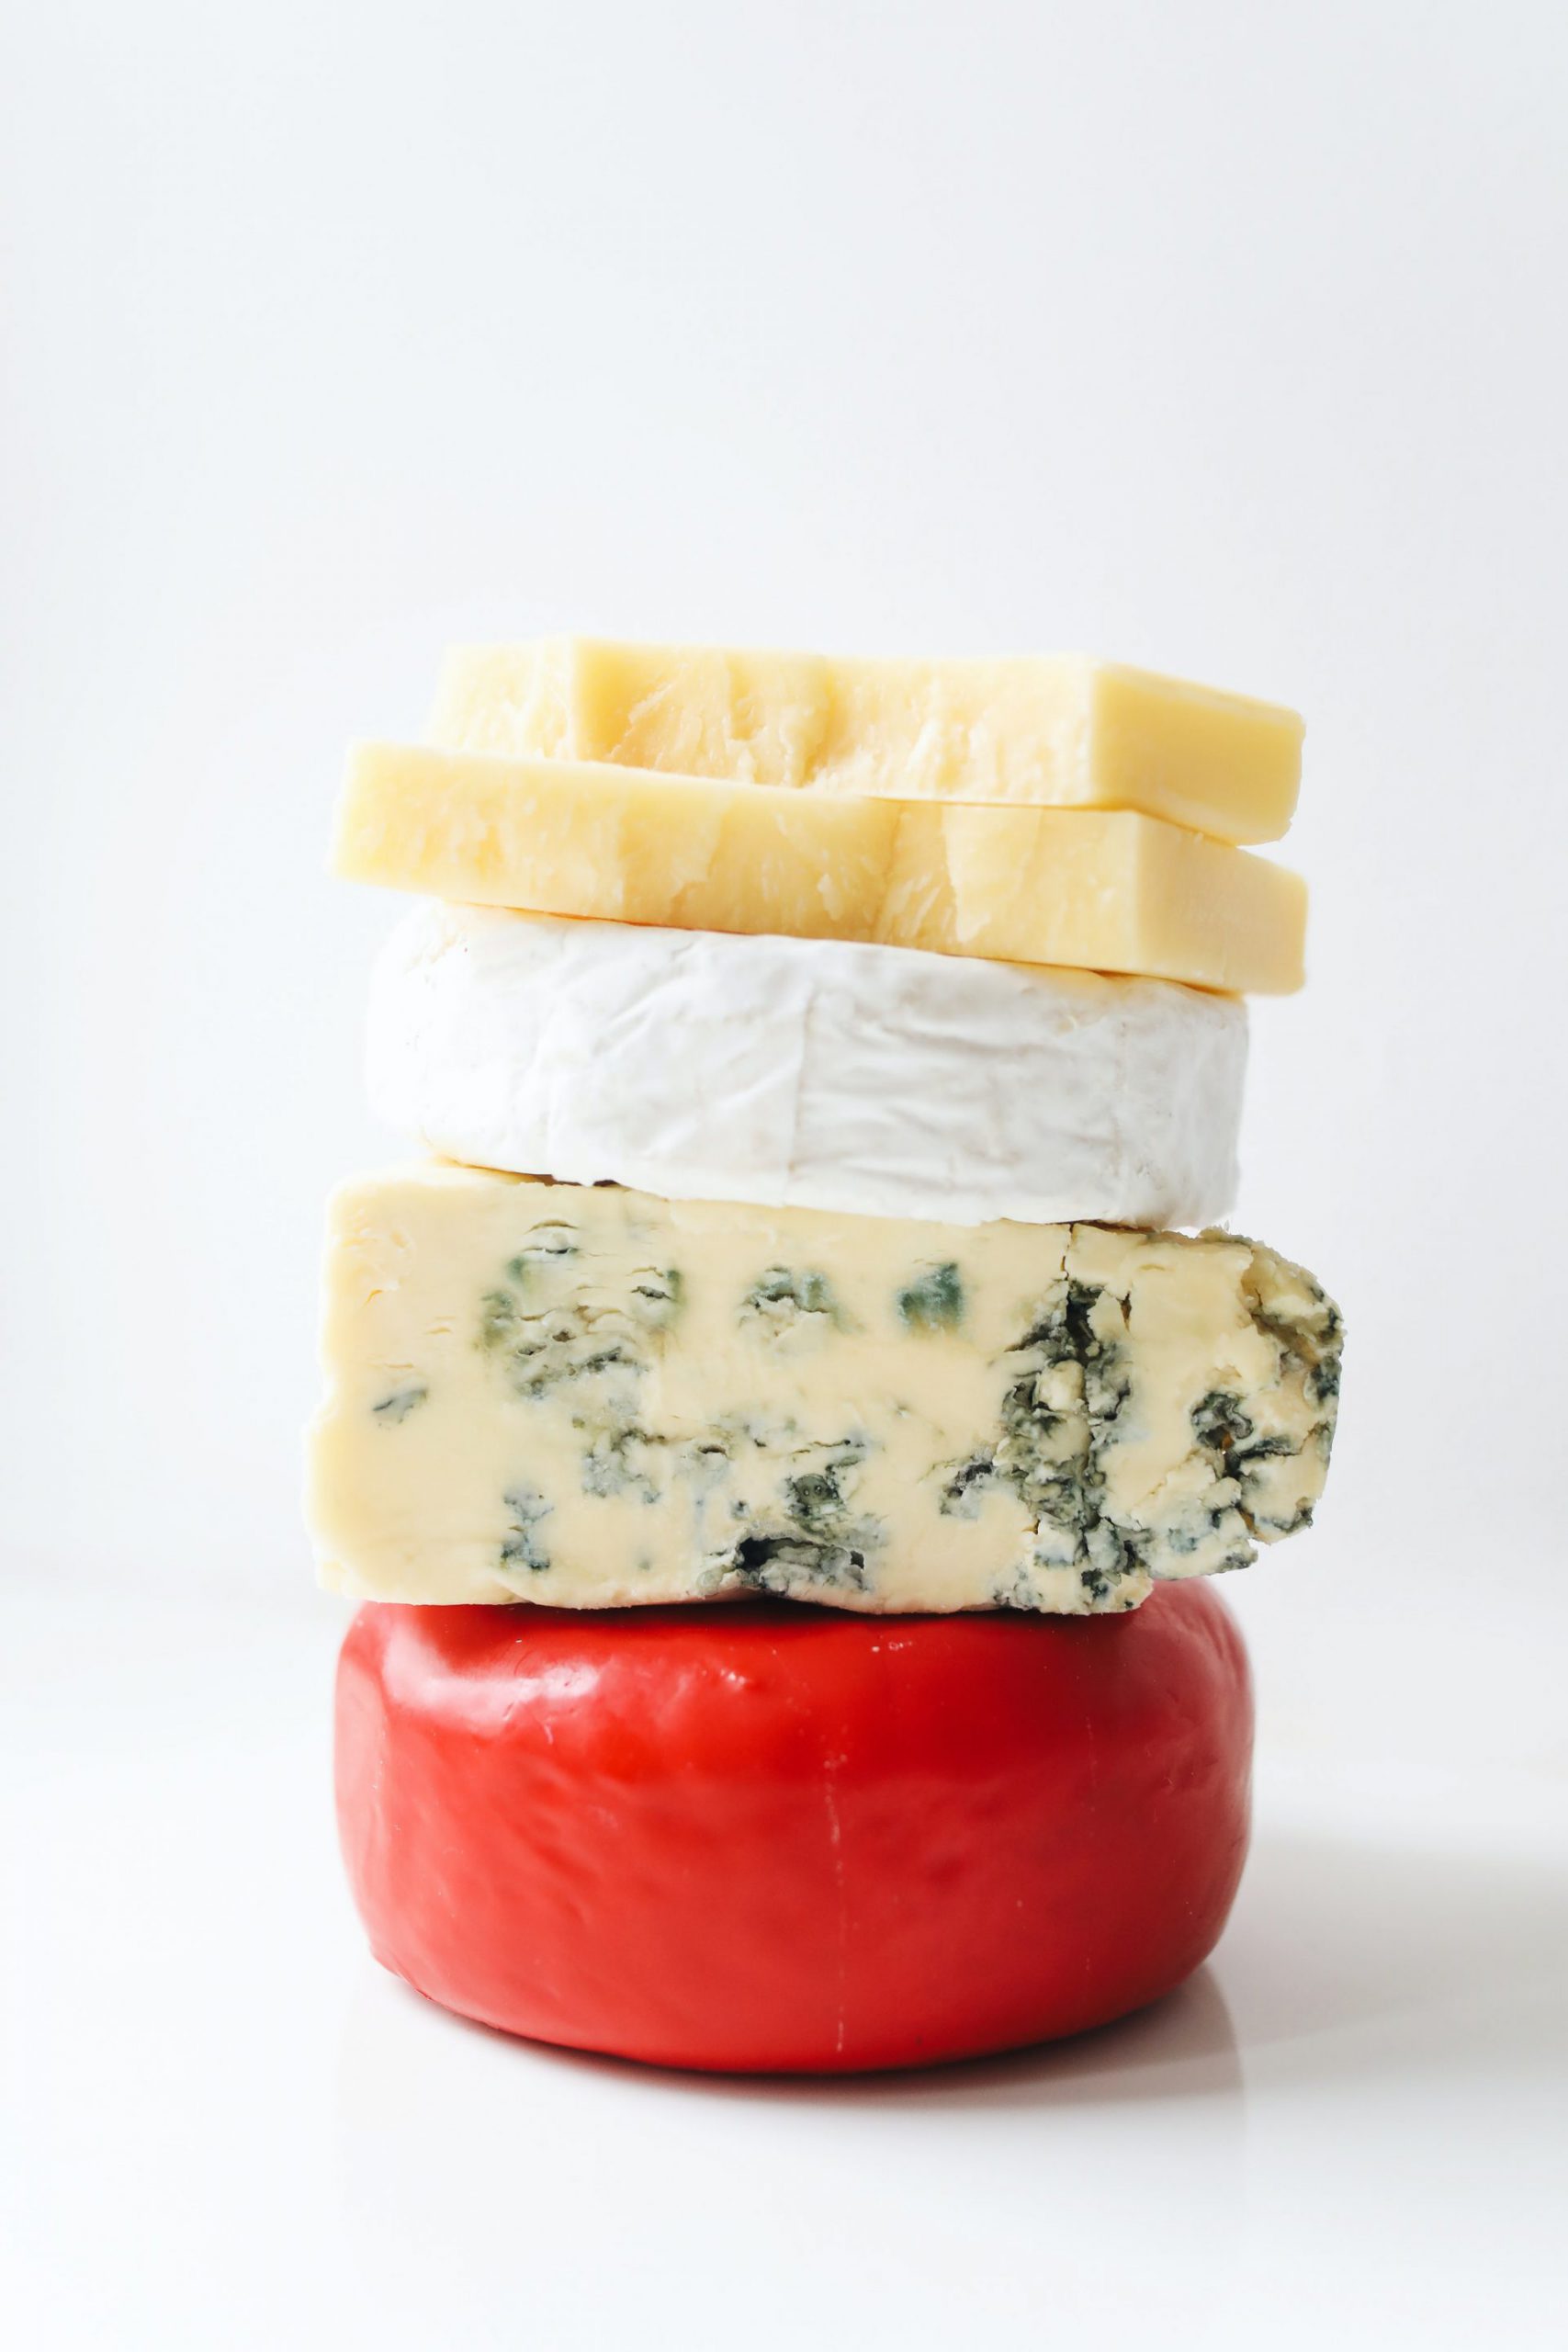 World's best cheeses. Where do they come from?